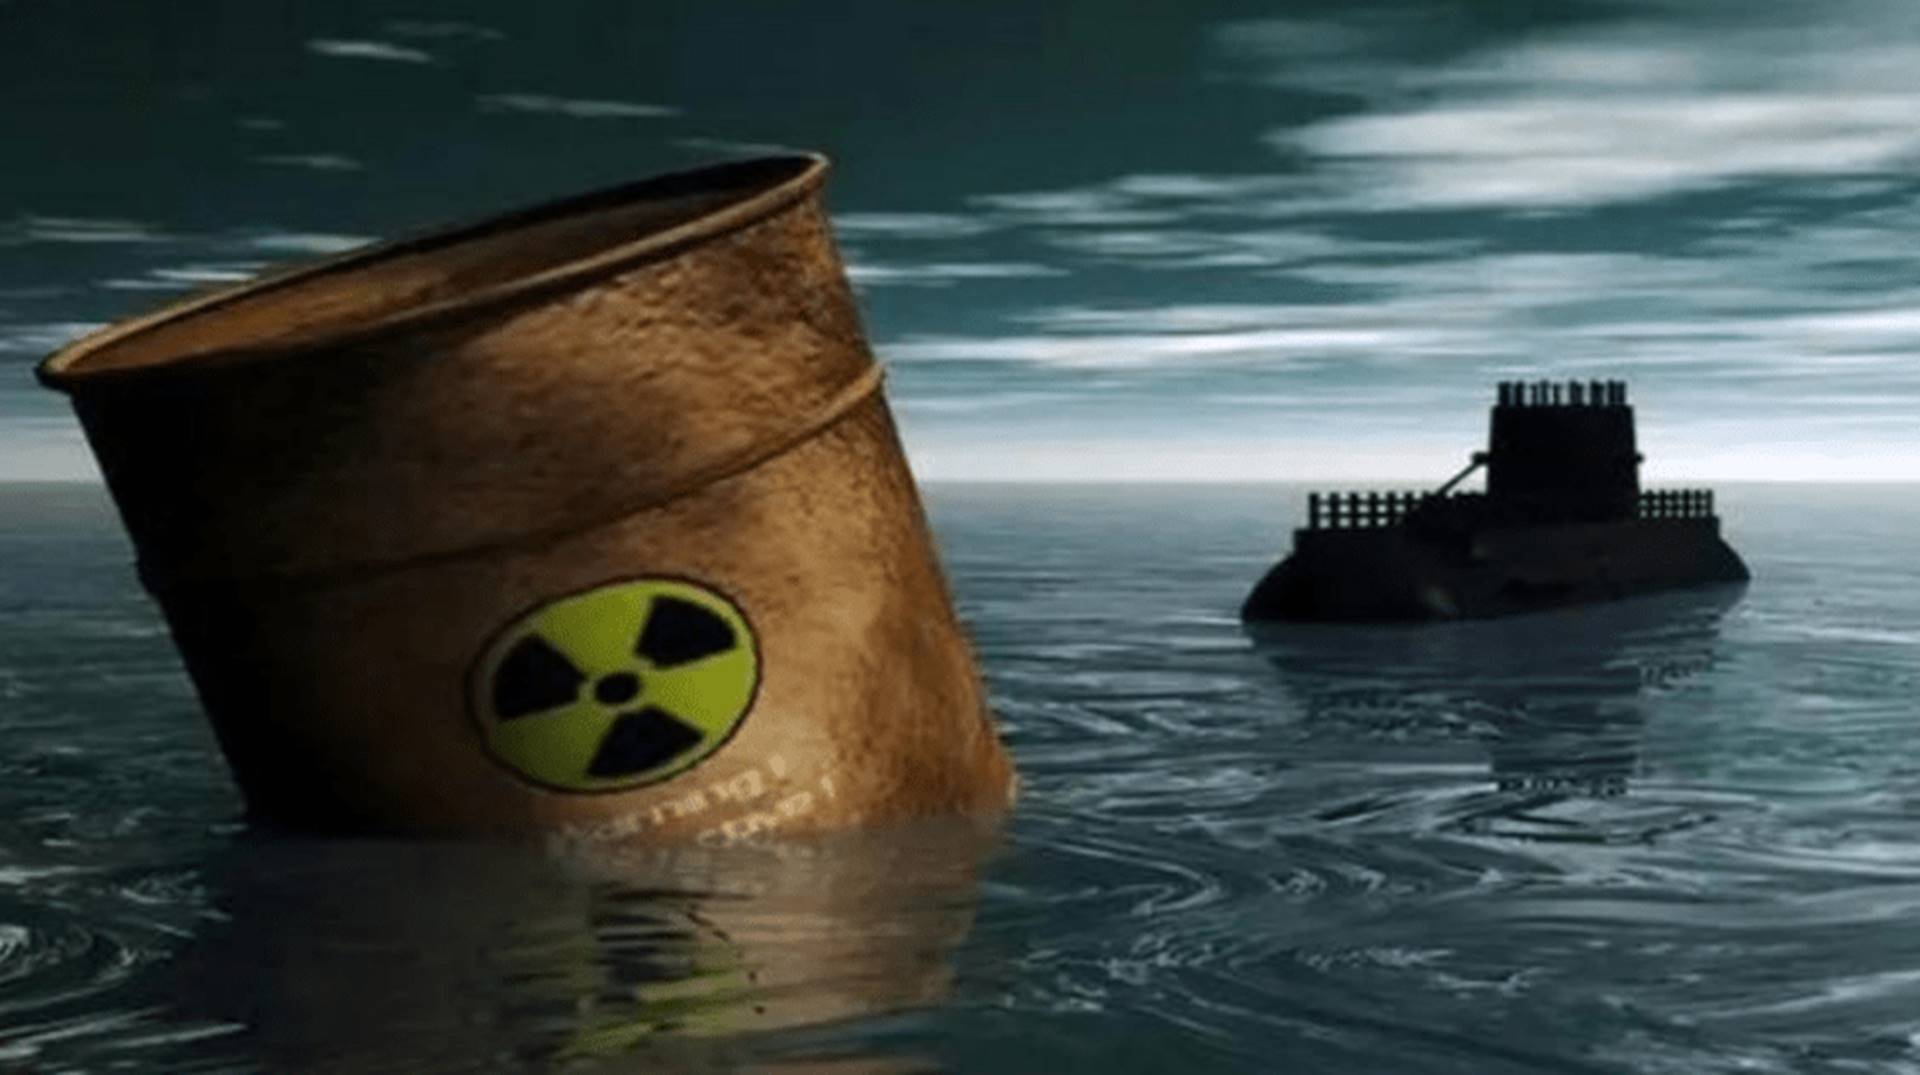 IAEA team in Japan to review plan to dump nuclear waste into the sea